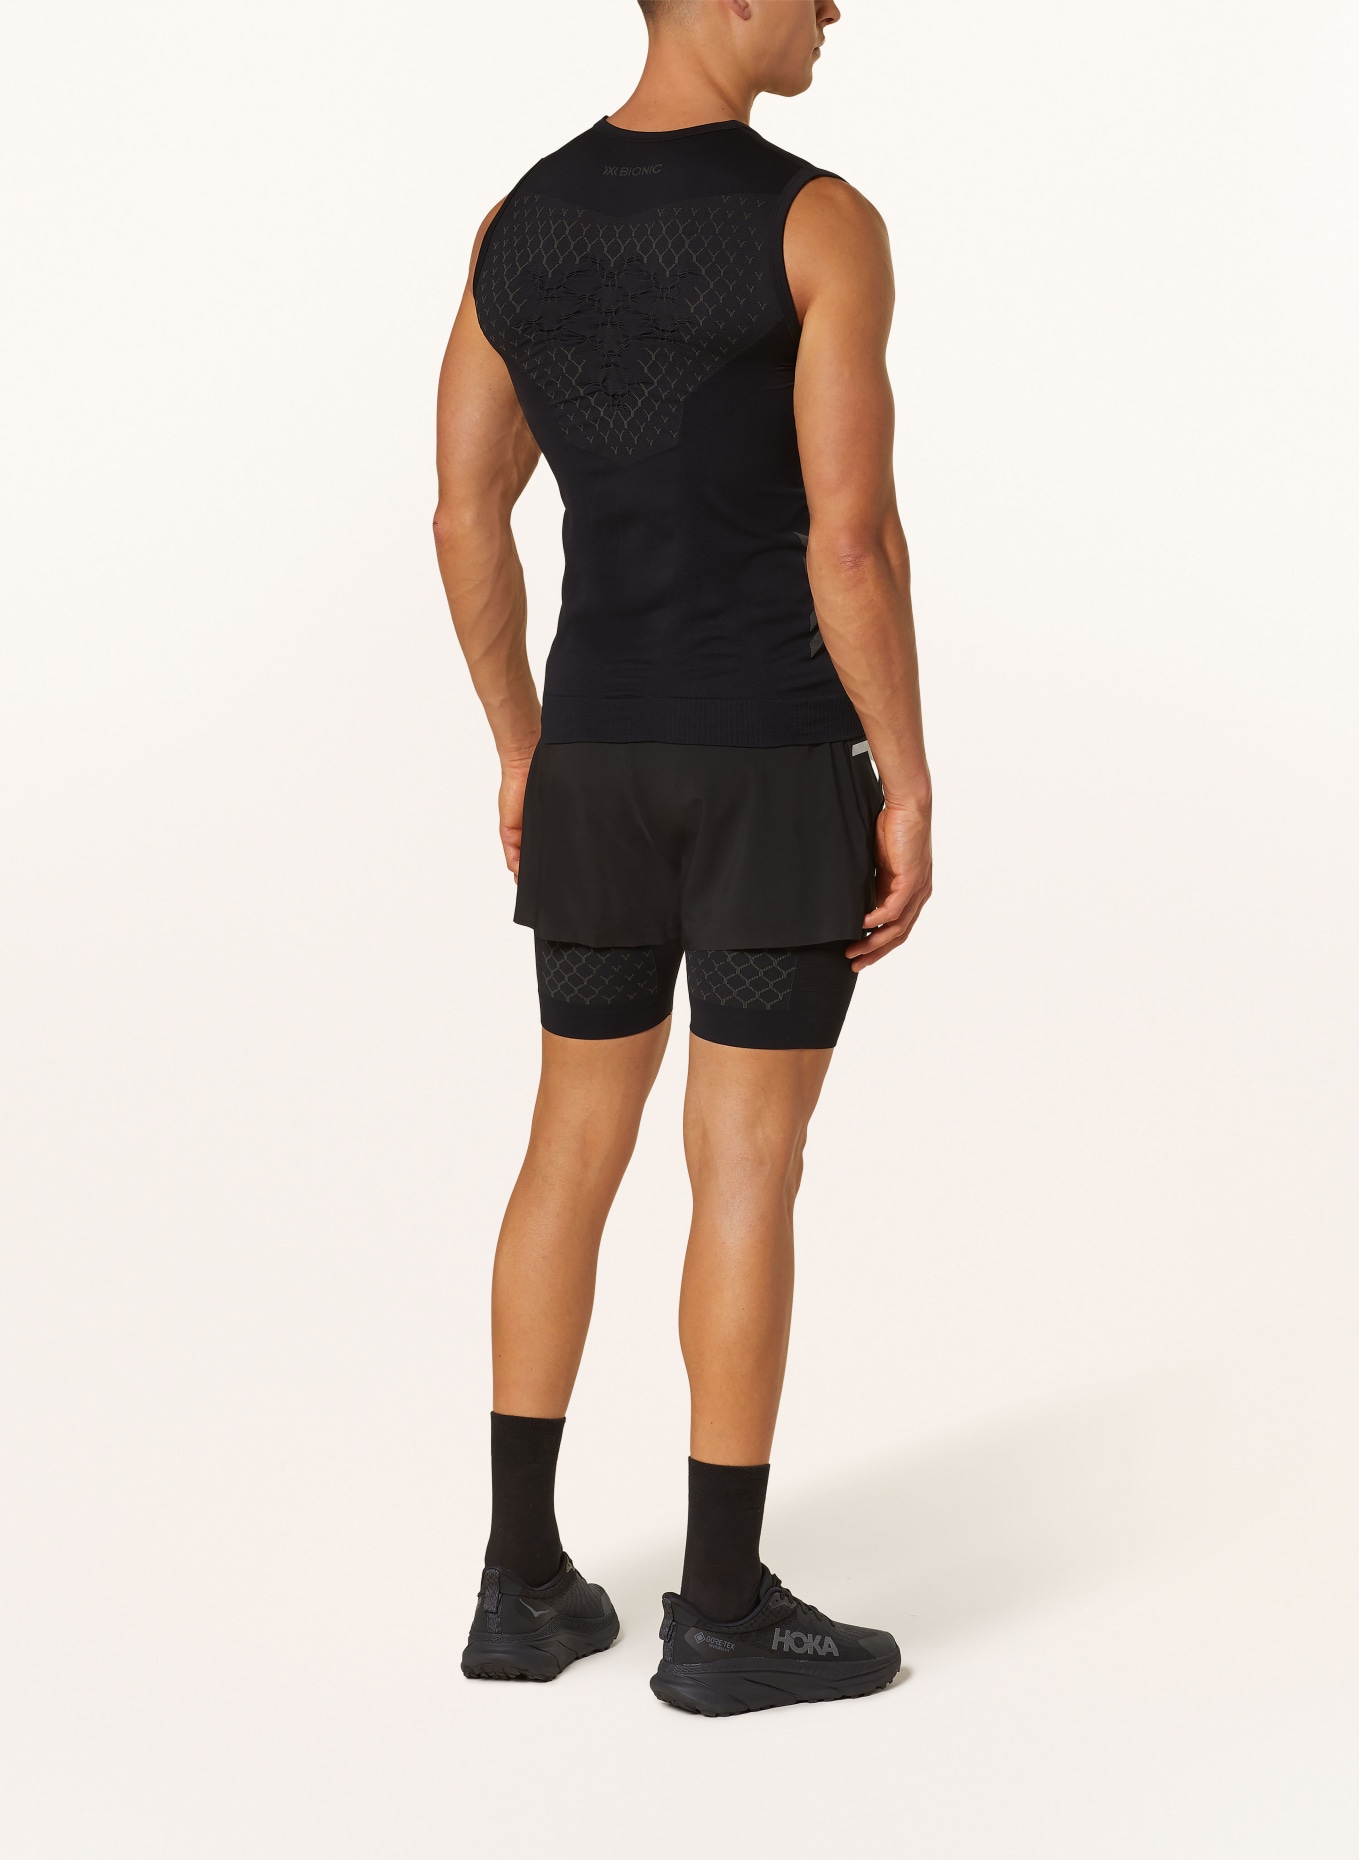 X-BIONIC Running top TWYCE, Color: BLACK (Image 3)